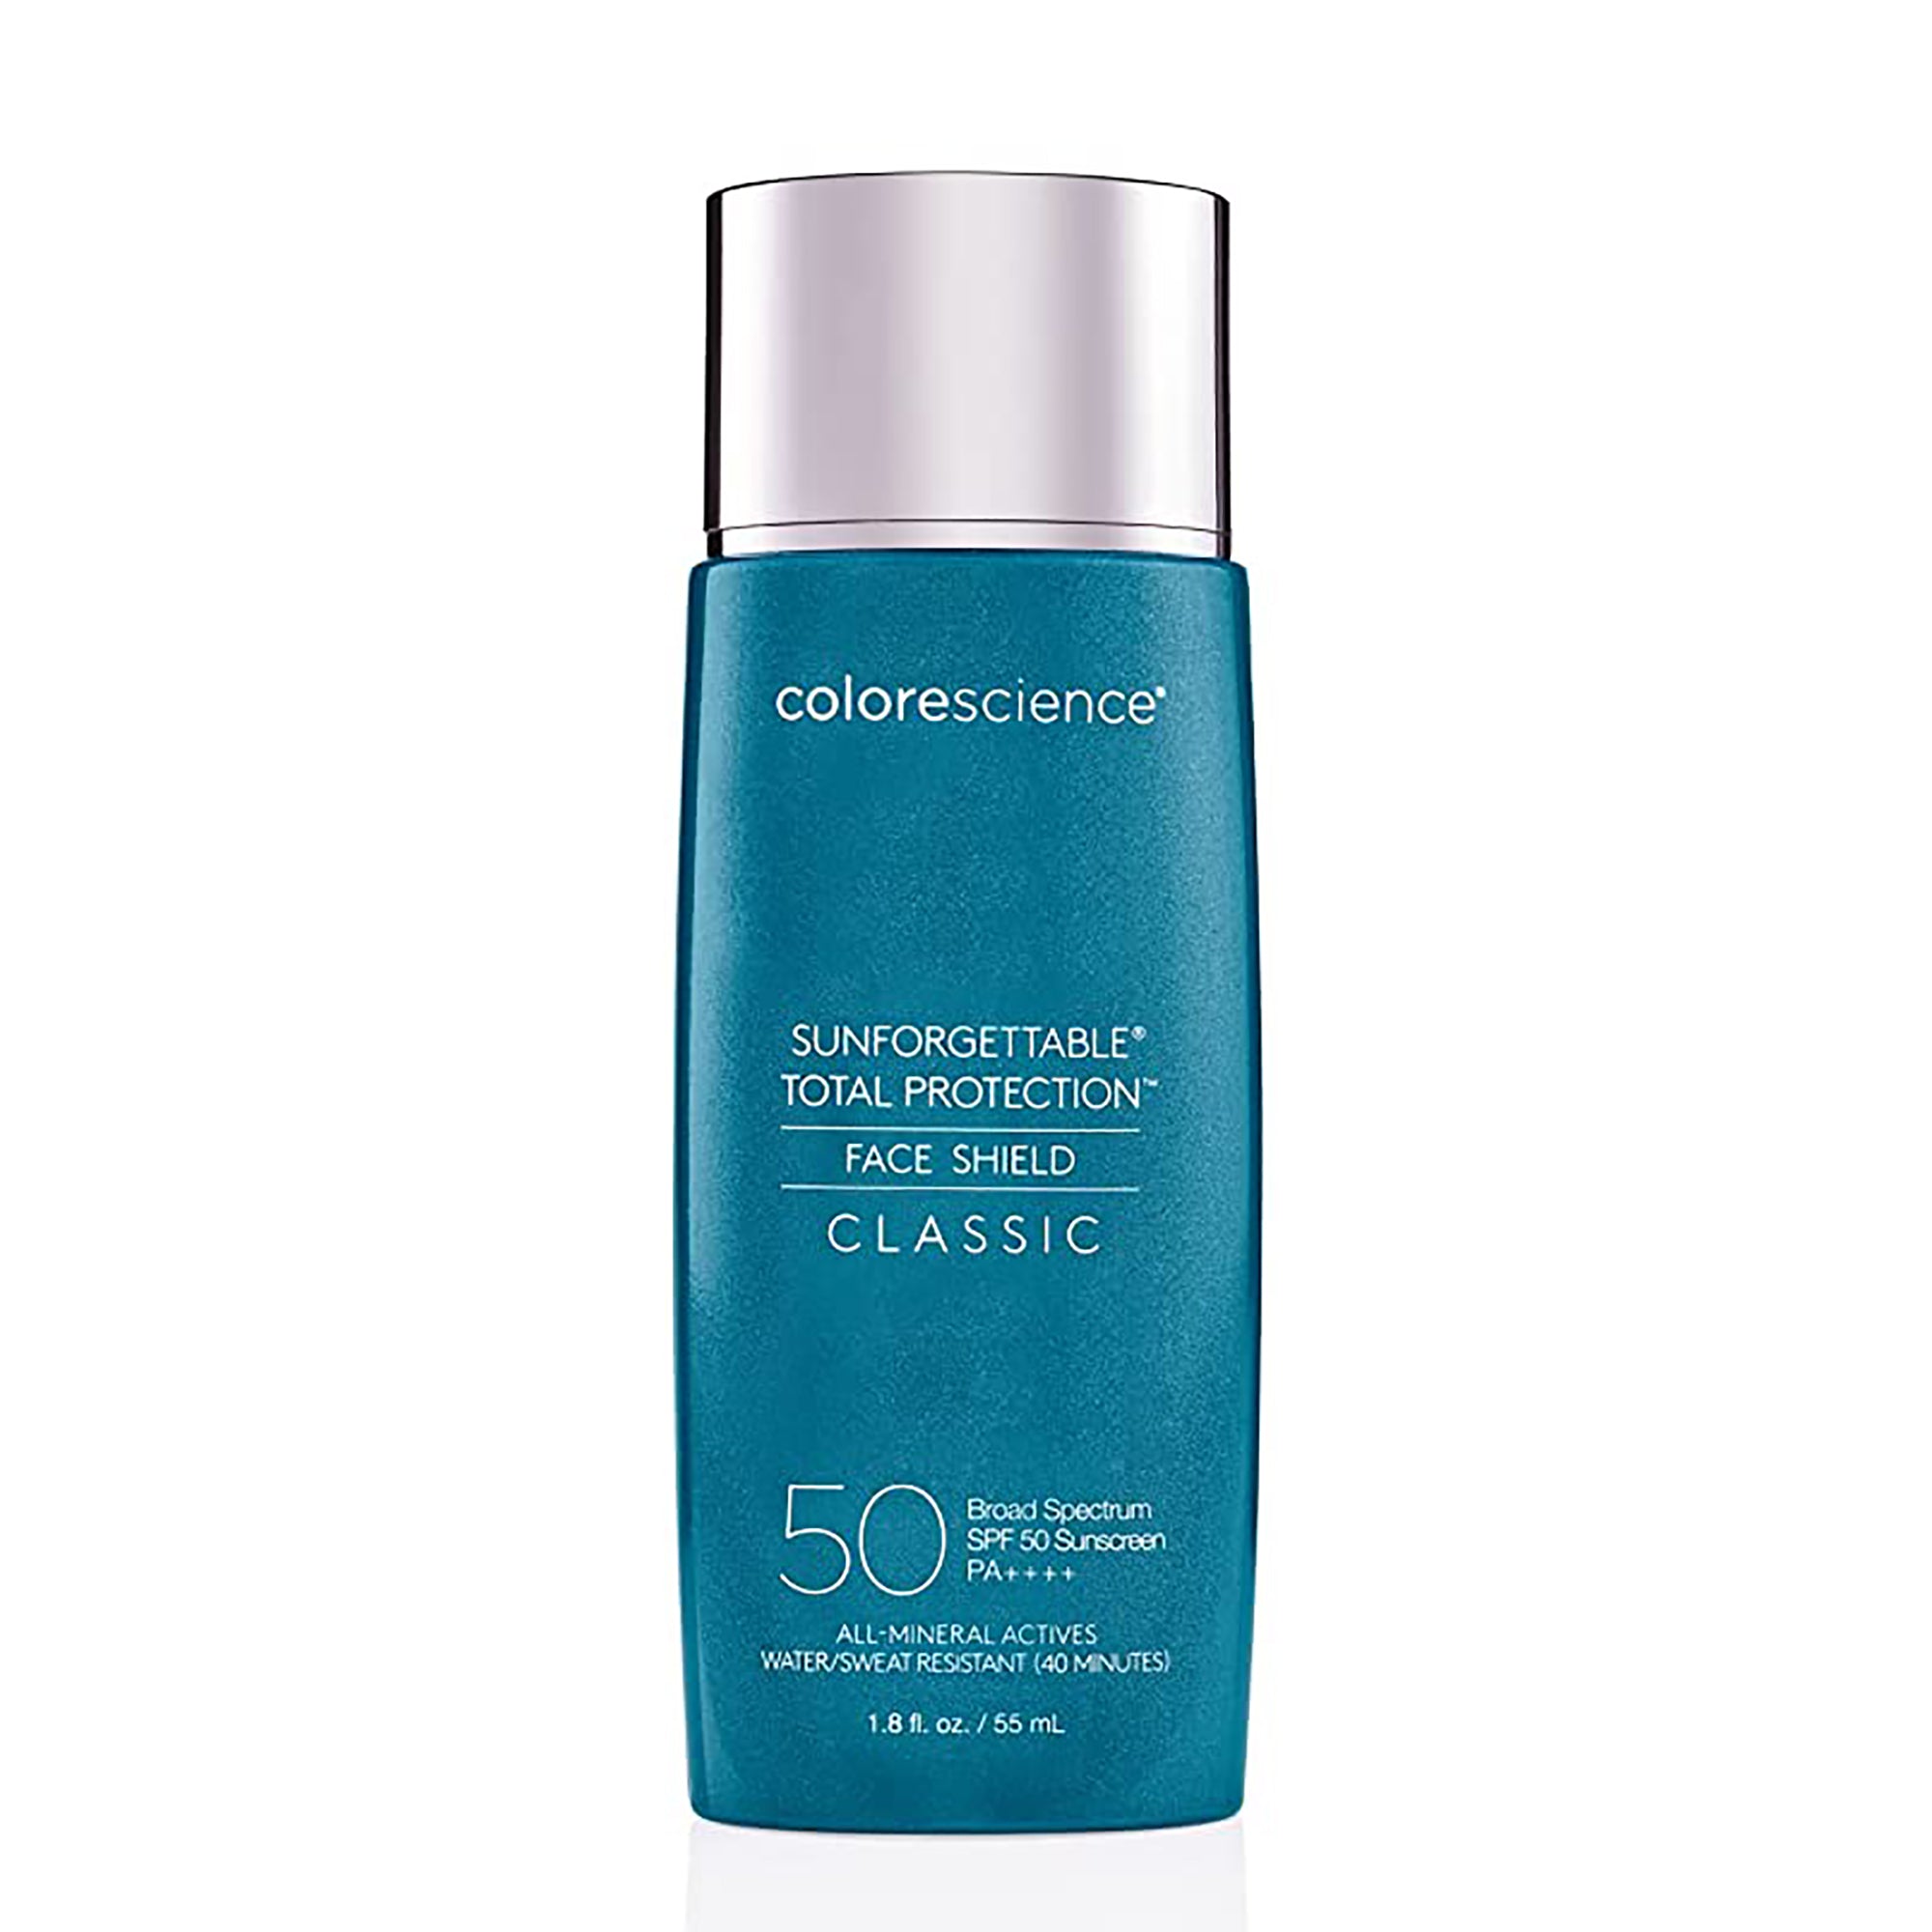 Colorescience Sunforgettable Total Protection Face Shield SPF 50 / CLASSIC